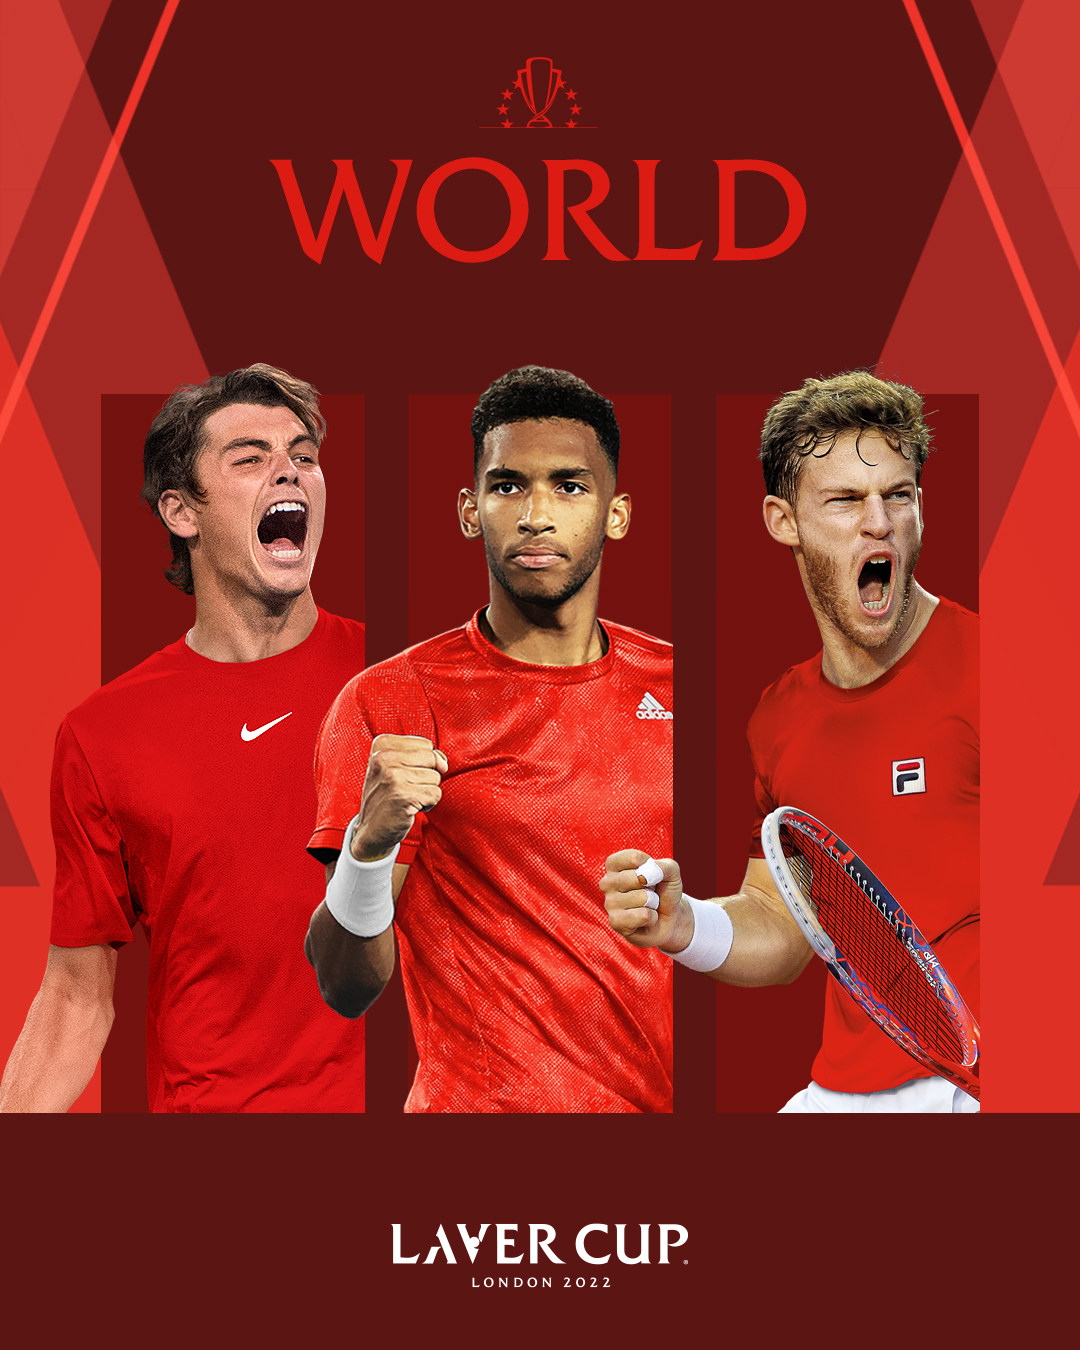 Laver Cup the first three Team World players for Laver Cup London 2022: and will return under the leadership of Captain John McEnroe. Full story